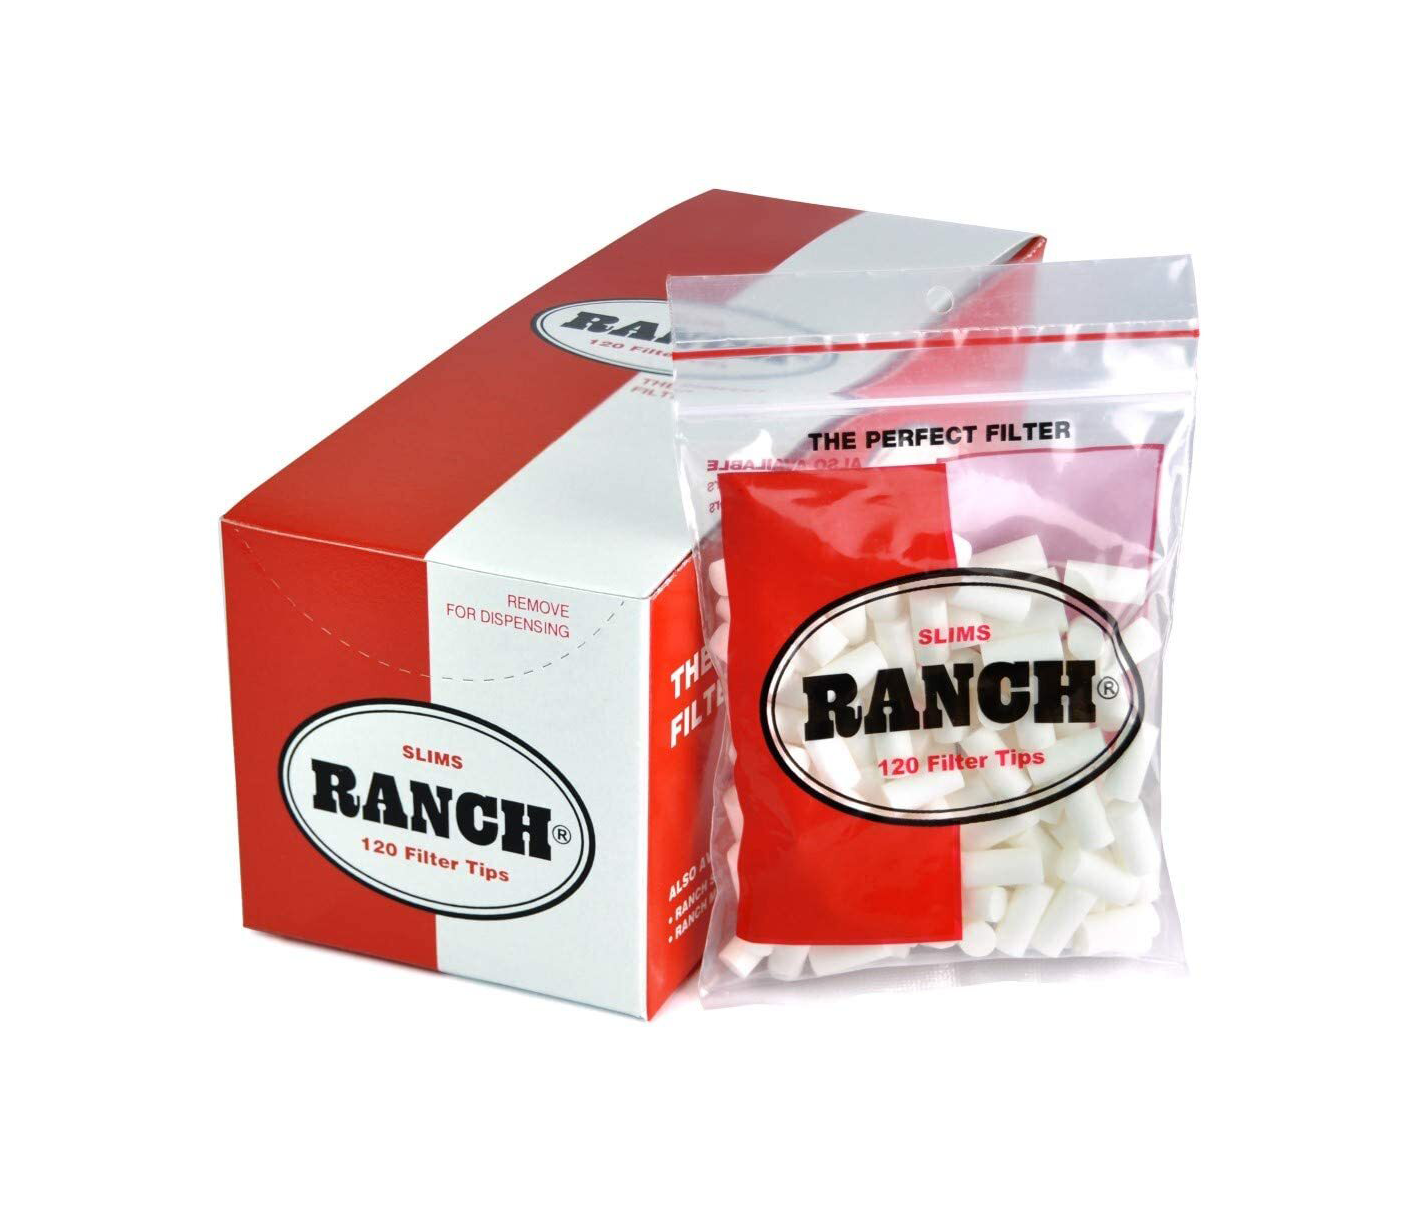 Ranch Filters Slim Red (Box of 12) - 20 Boxes